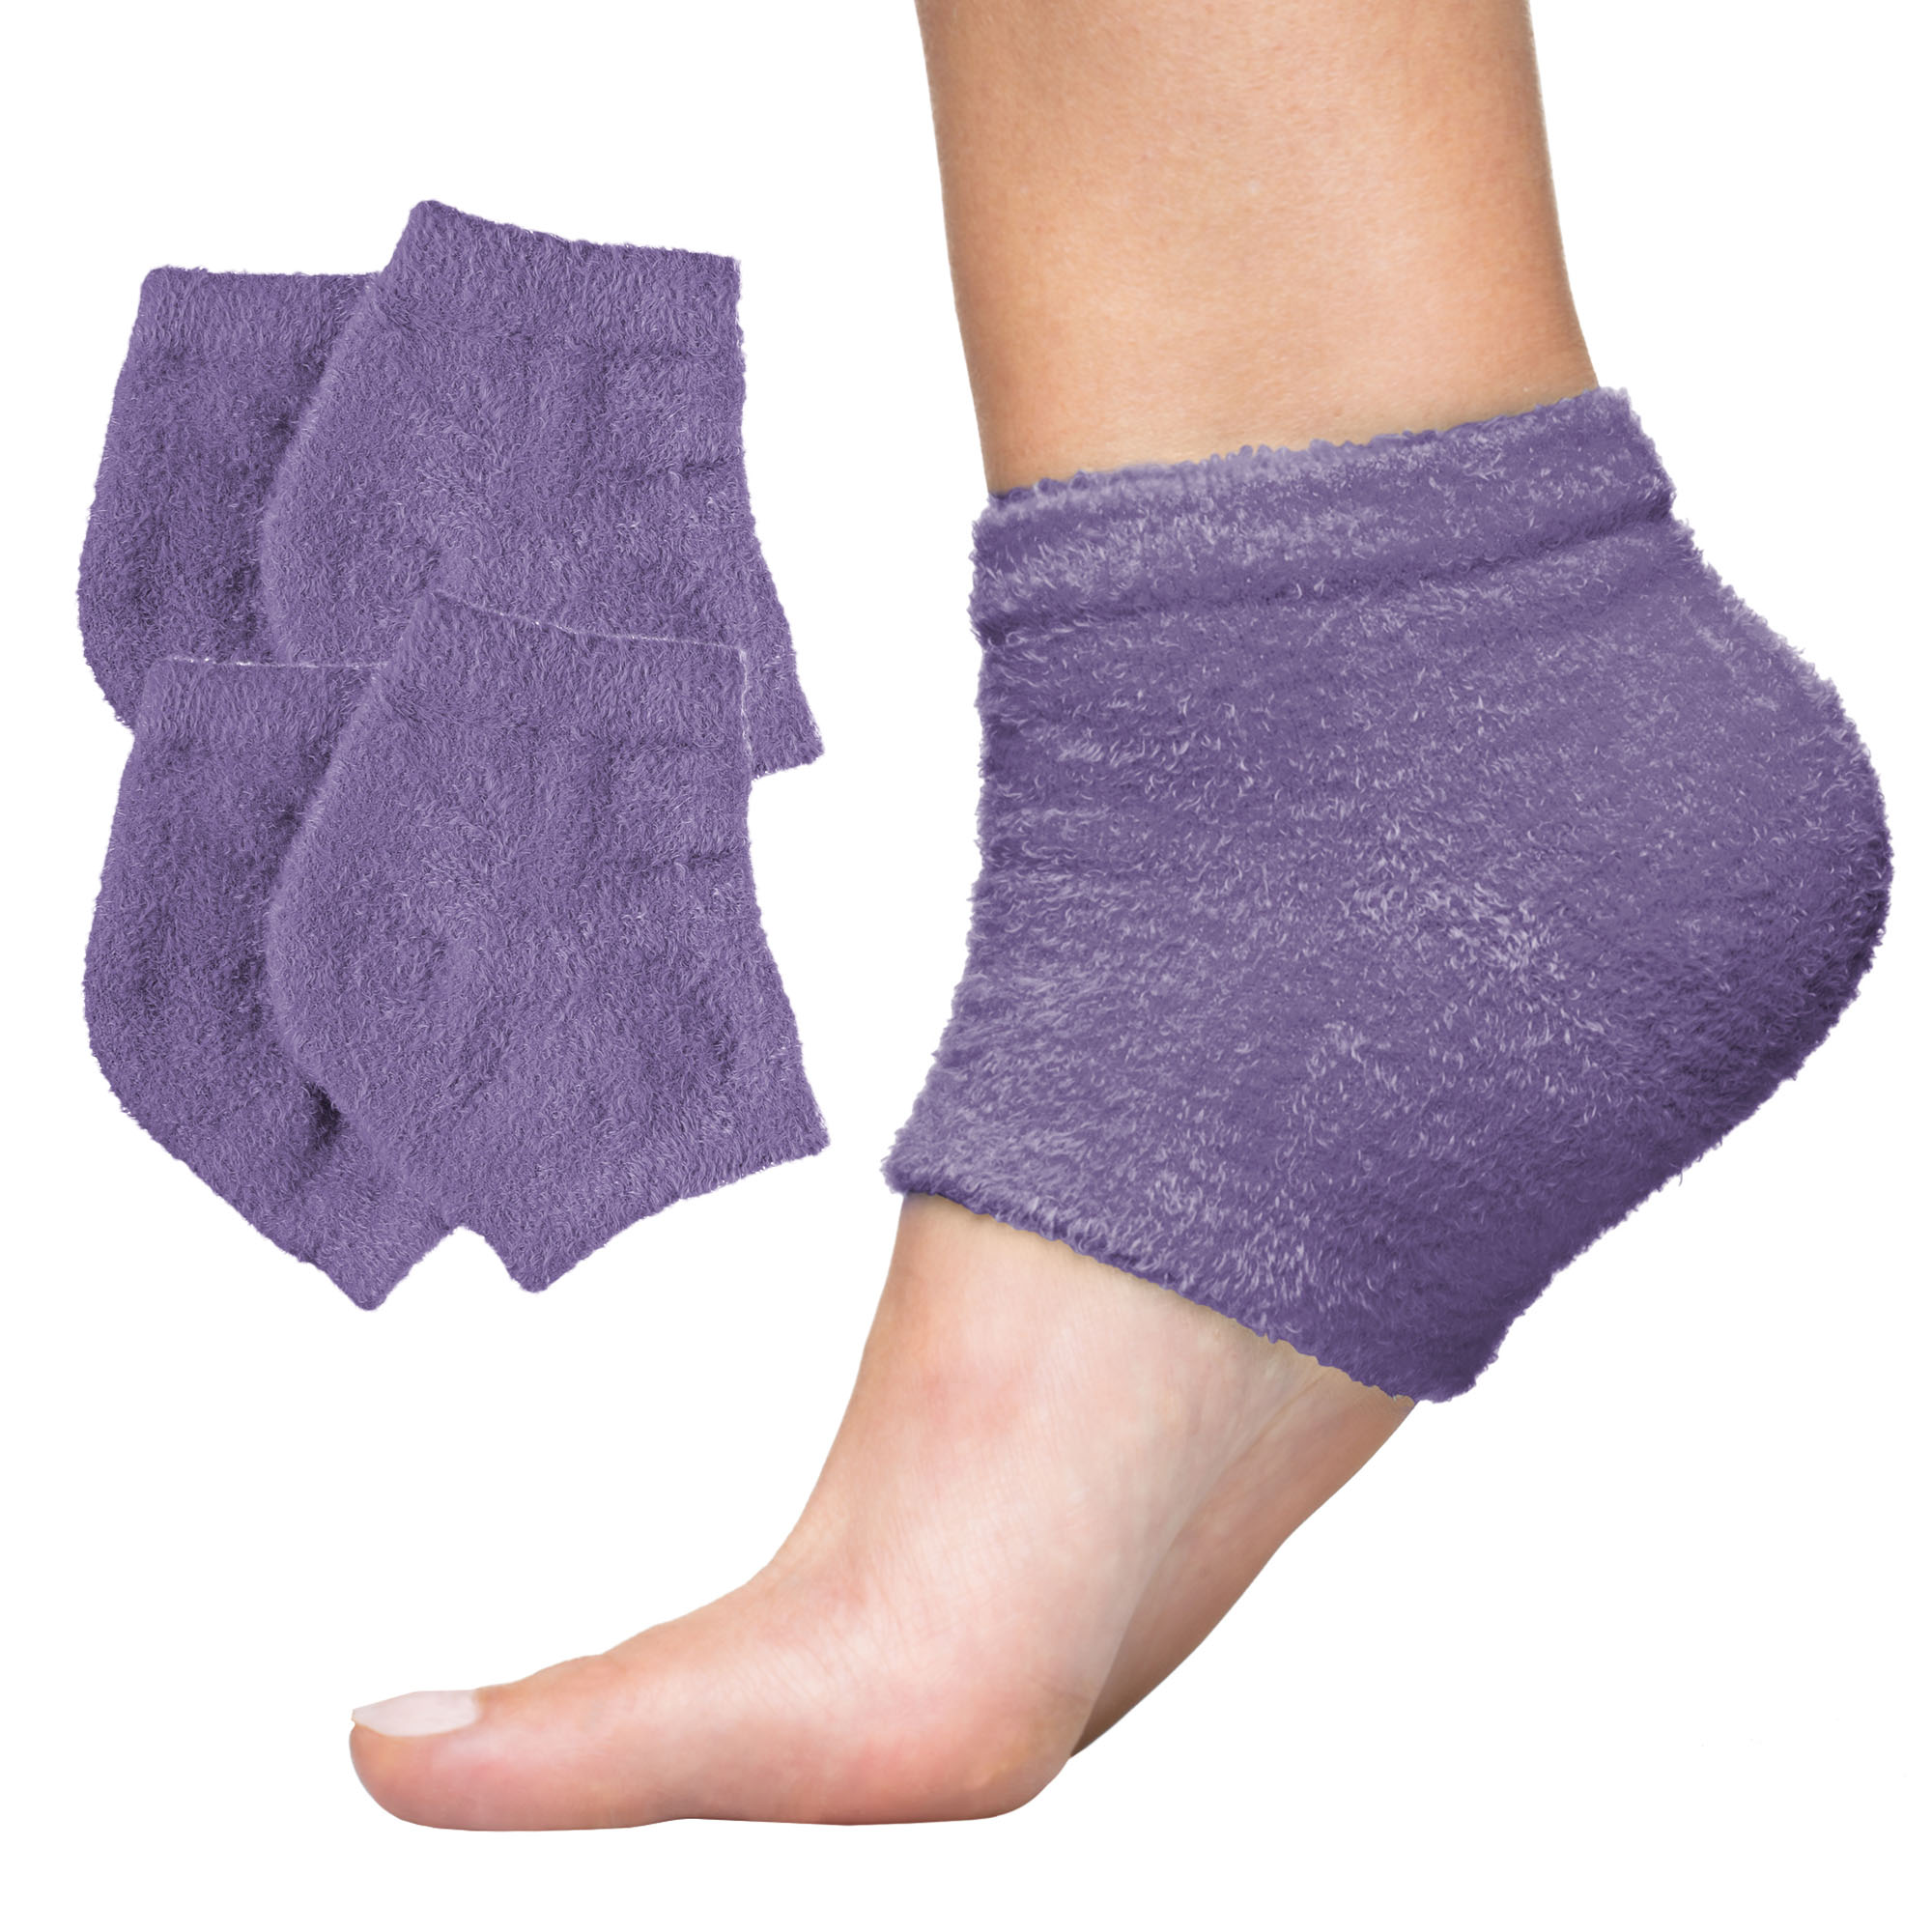  FootSmart Gel-Lined Compression Toe Separating Socks, Pair :  Beauty & Personal Care